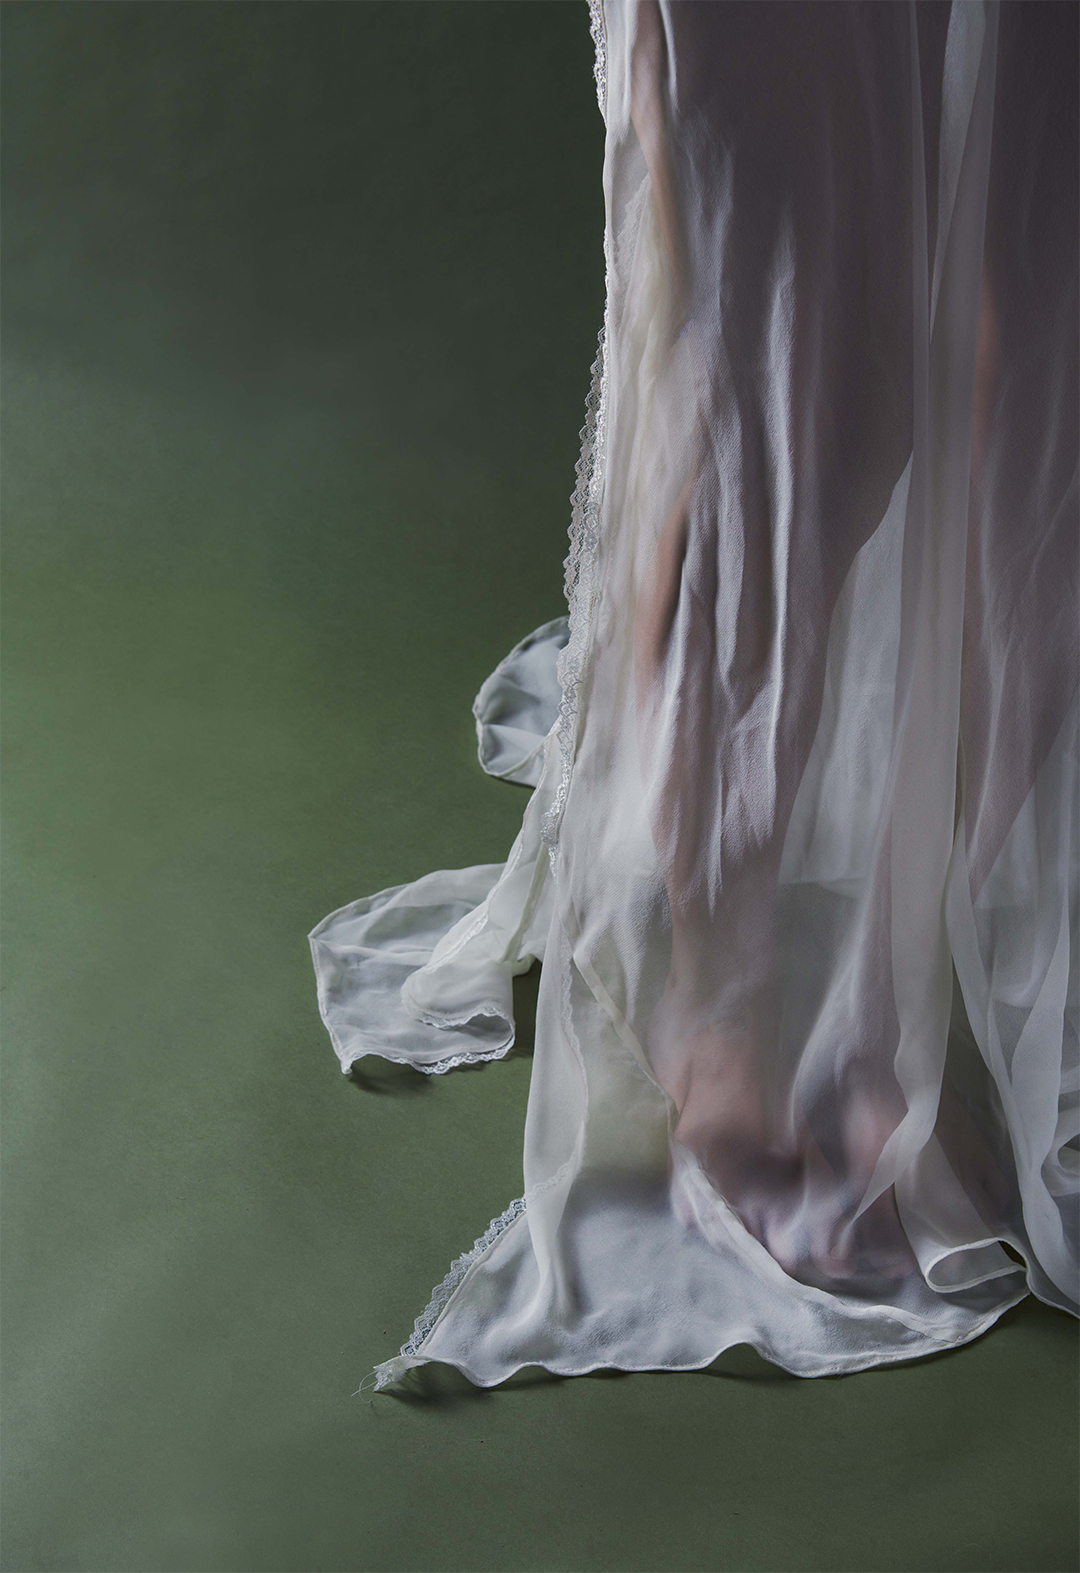 This image features a detail shot of the hem of the pearl-white long bias gown, featuring lace detailing and a rolled hem. The image is taken in a green background setting. 